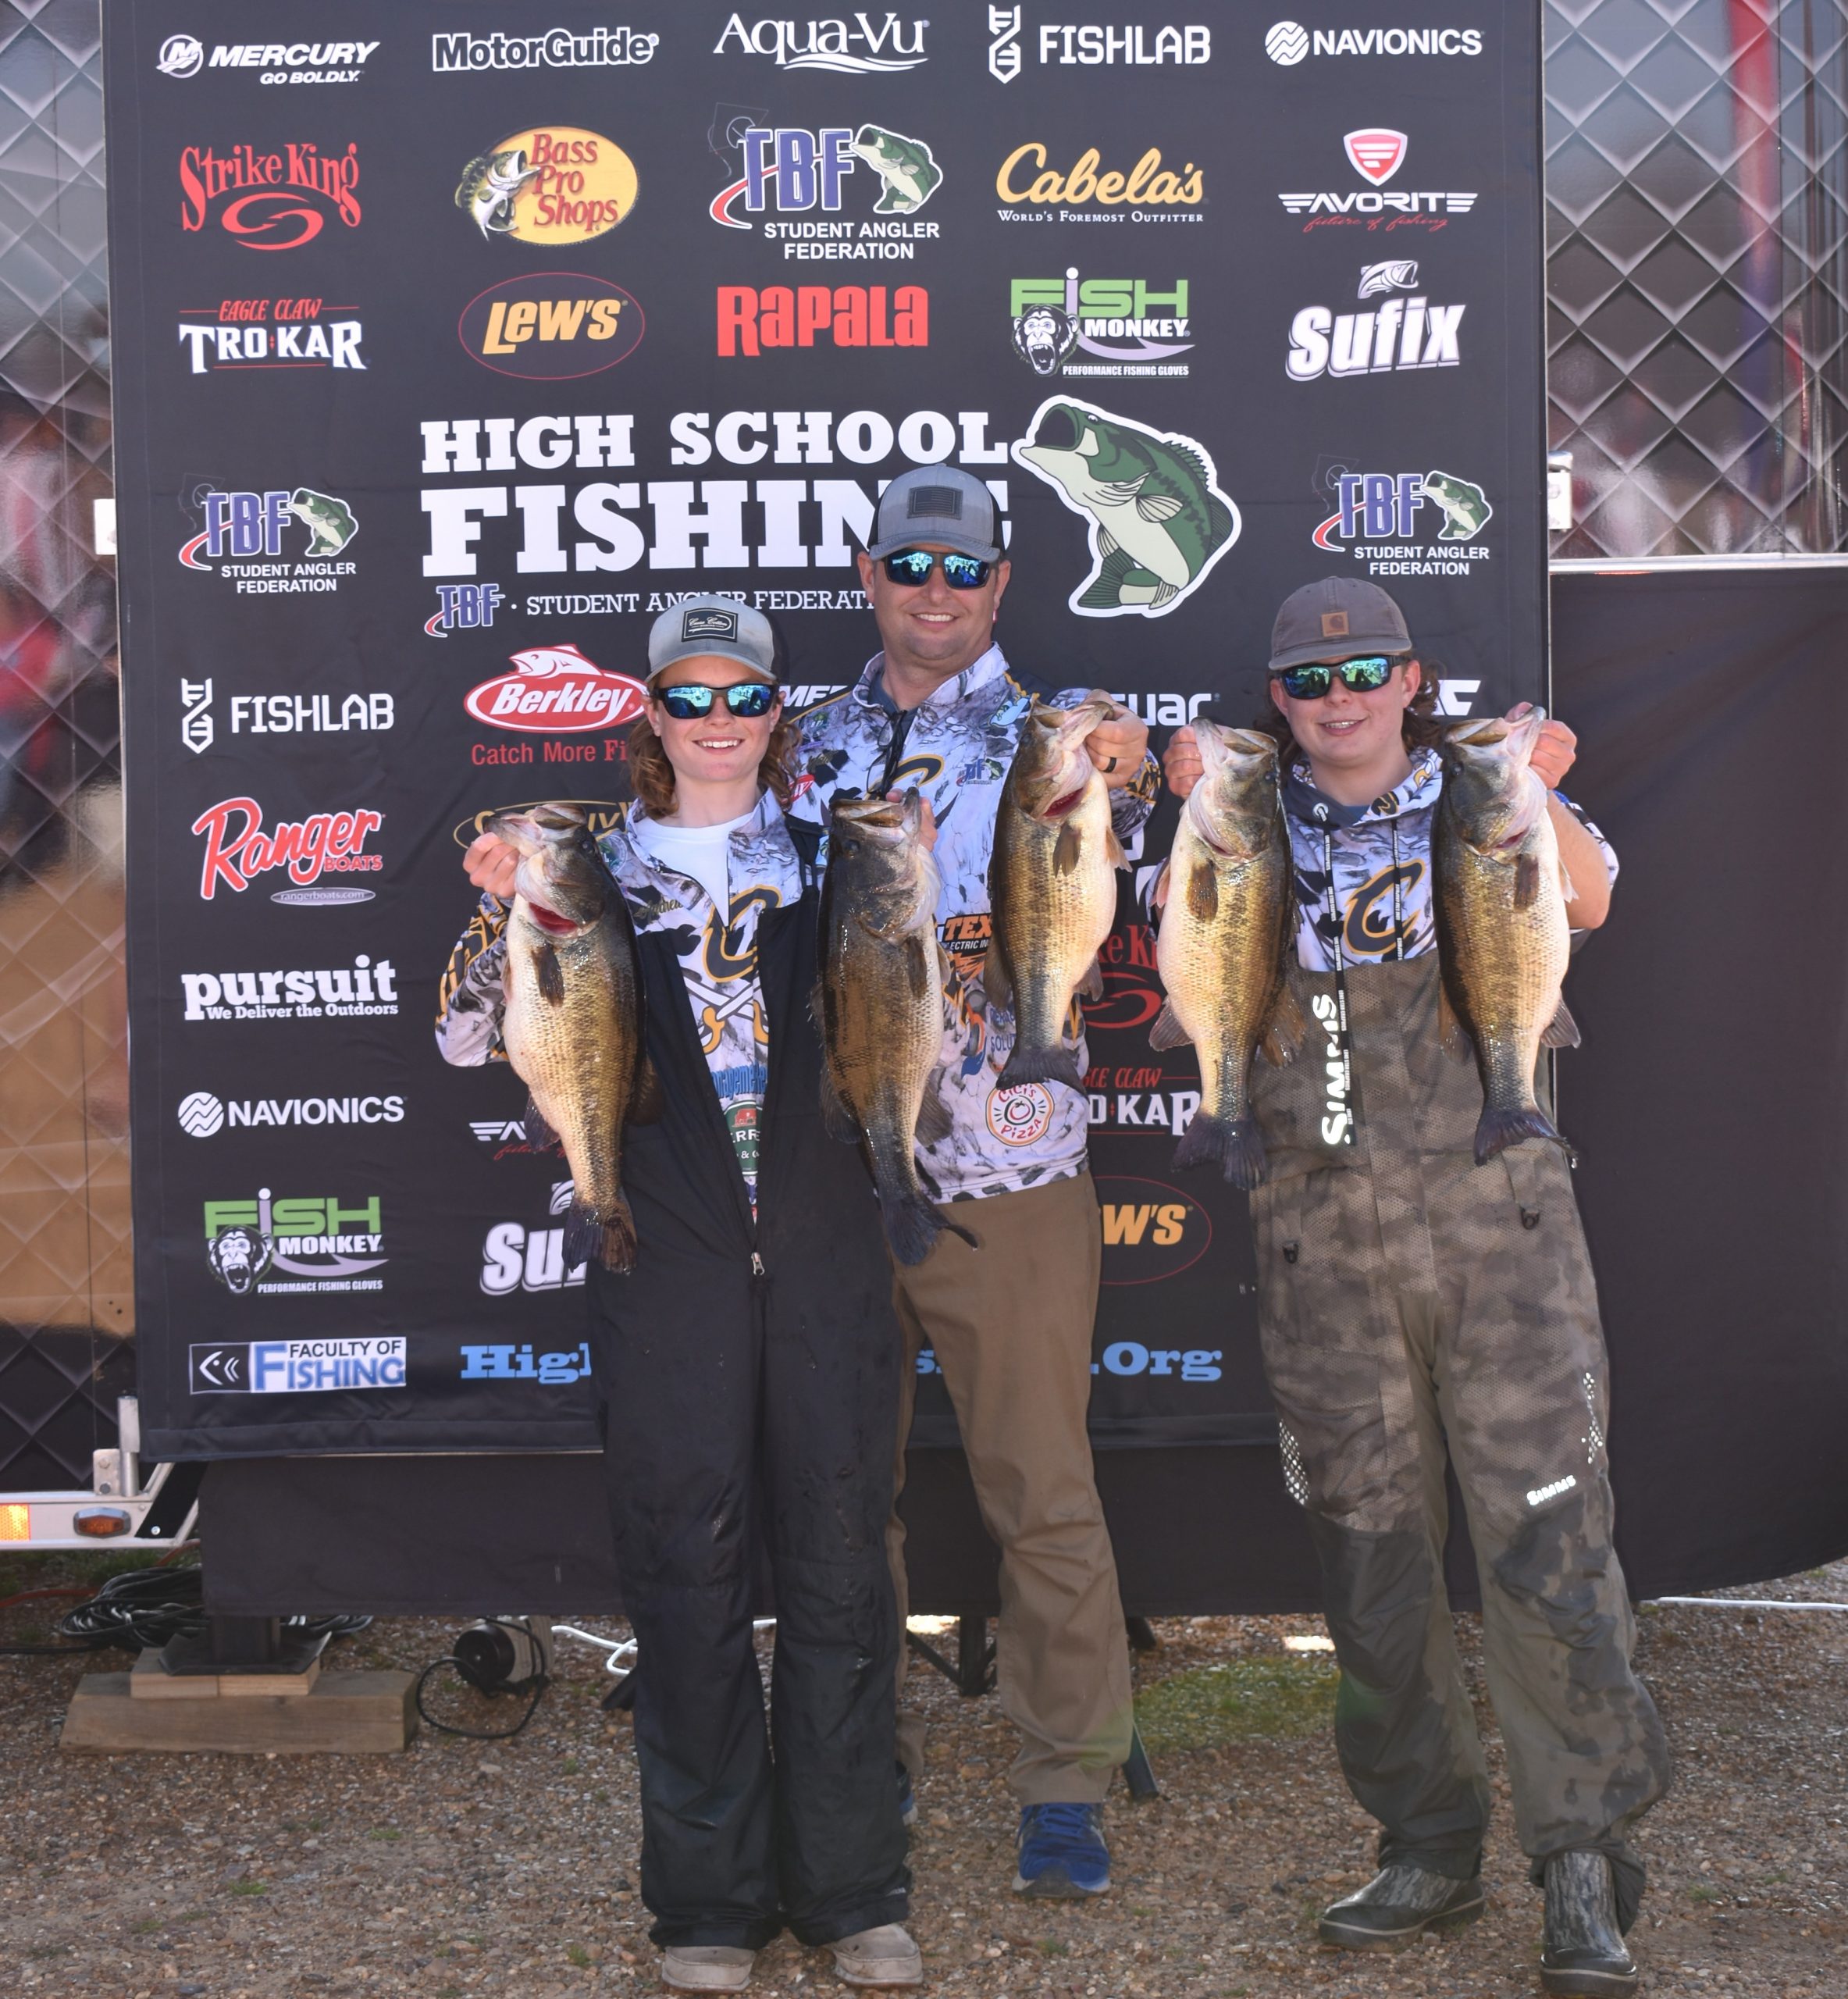 Caddo Bass Tournament to Help Junior Anglers Attend Championship